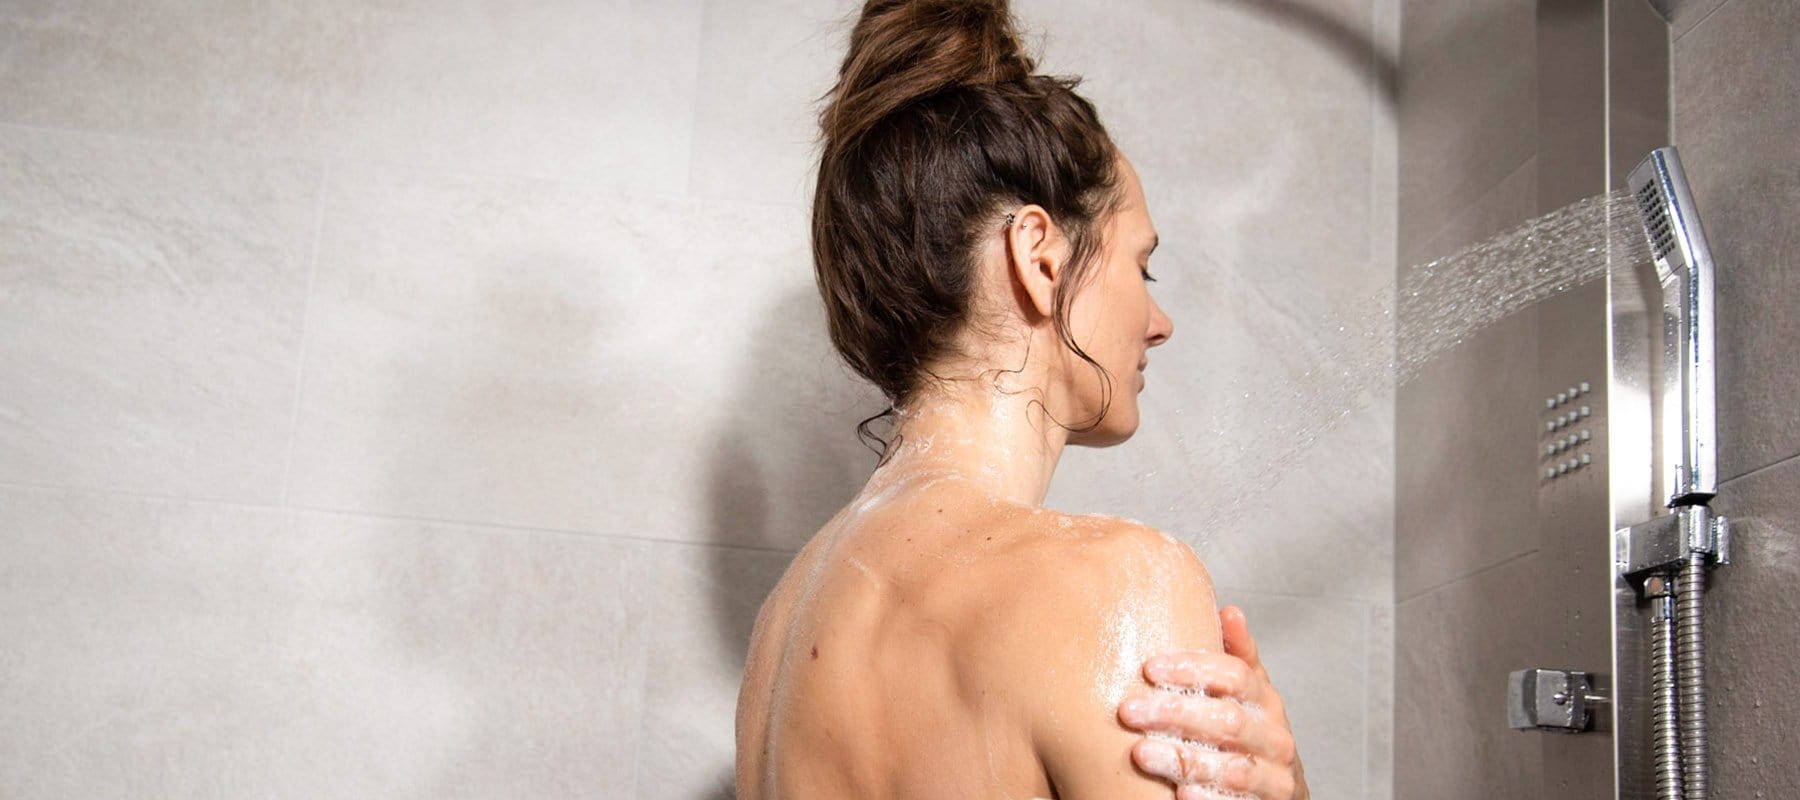 Shower Meditation is the self-care routine you need.